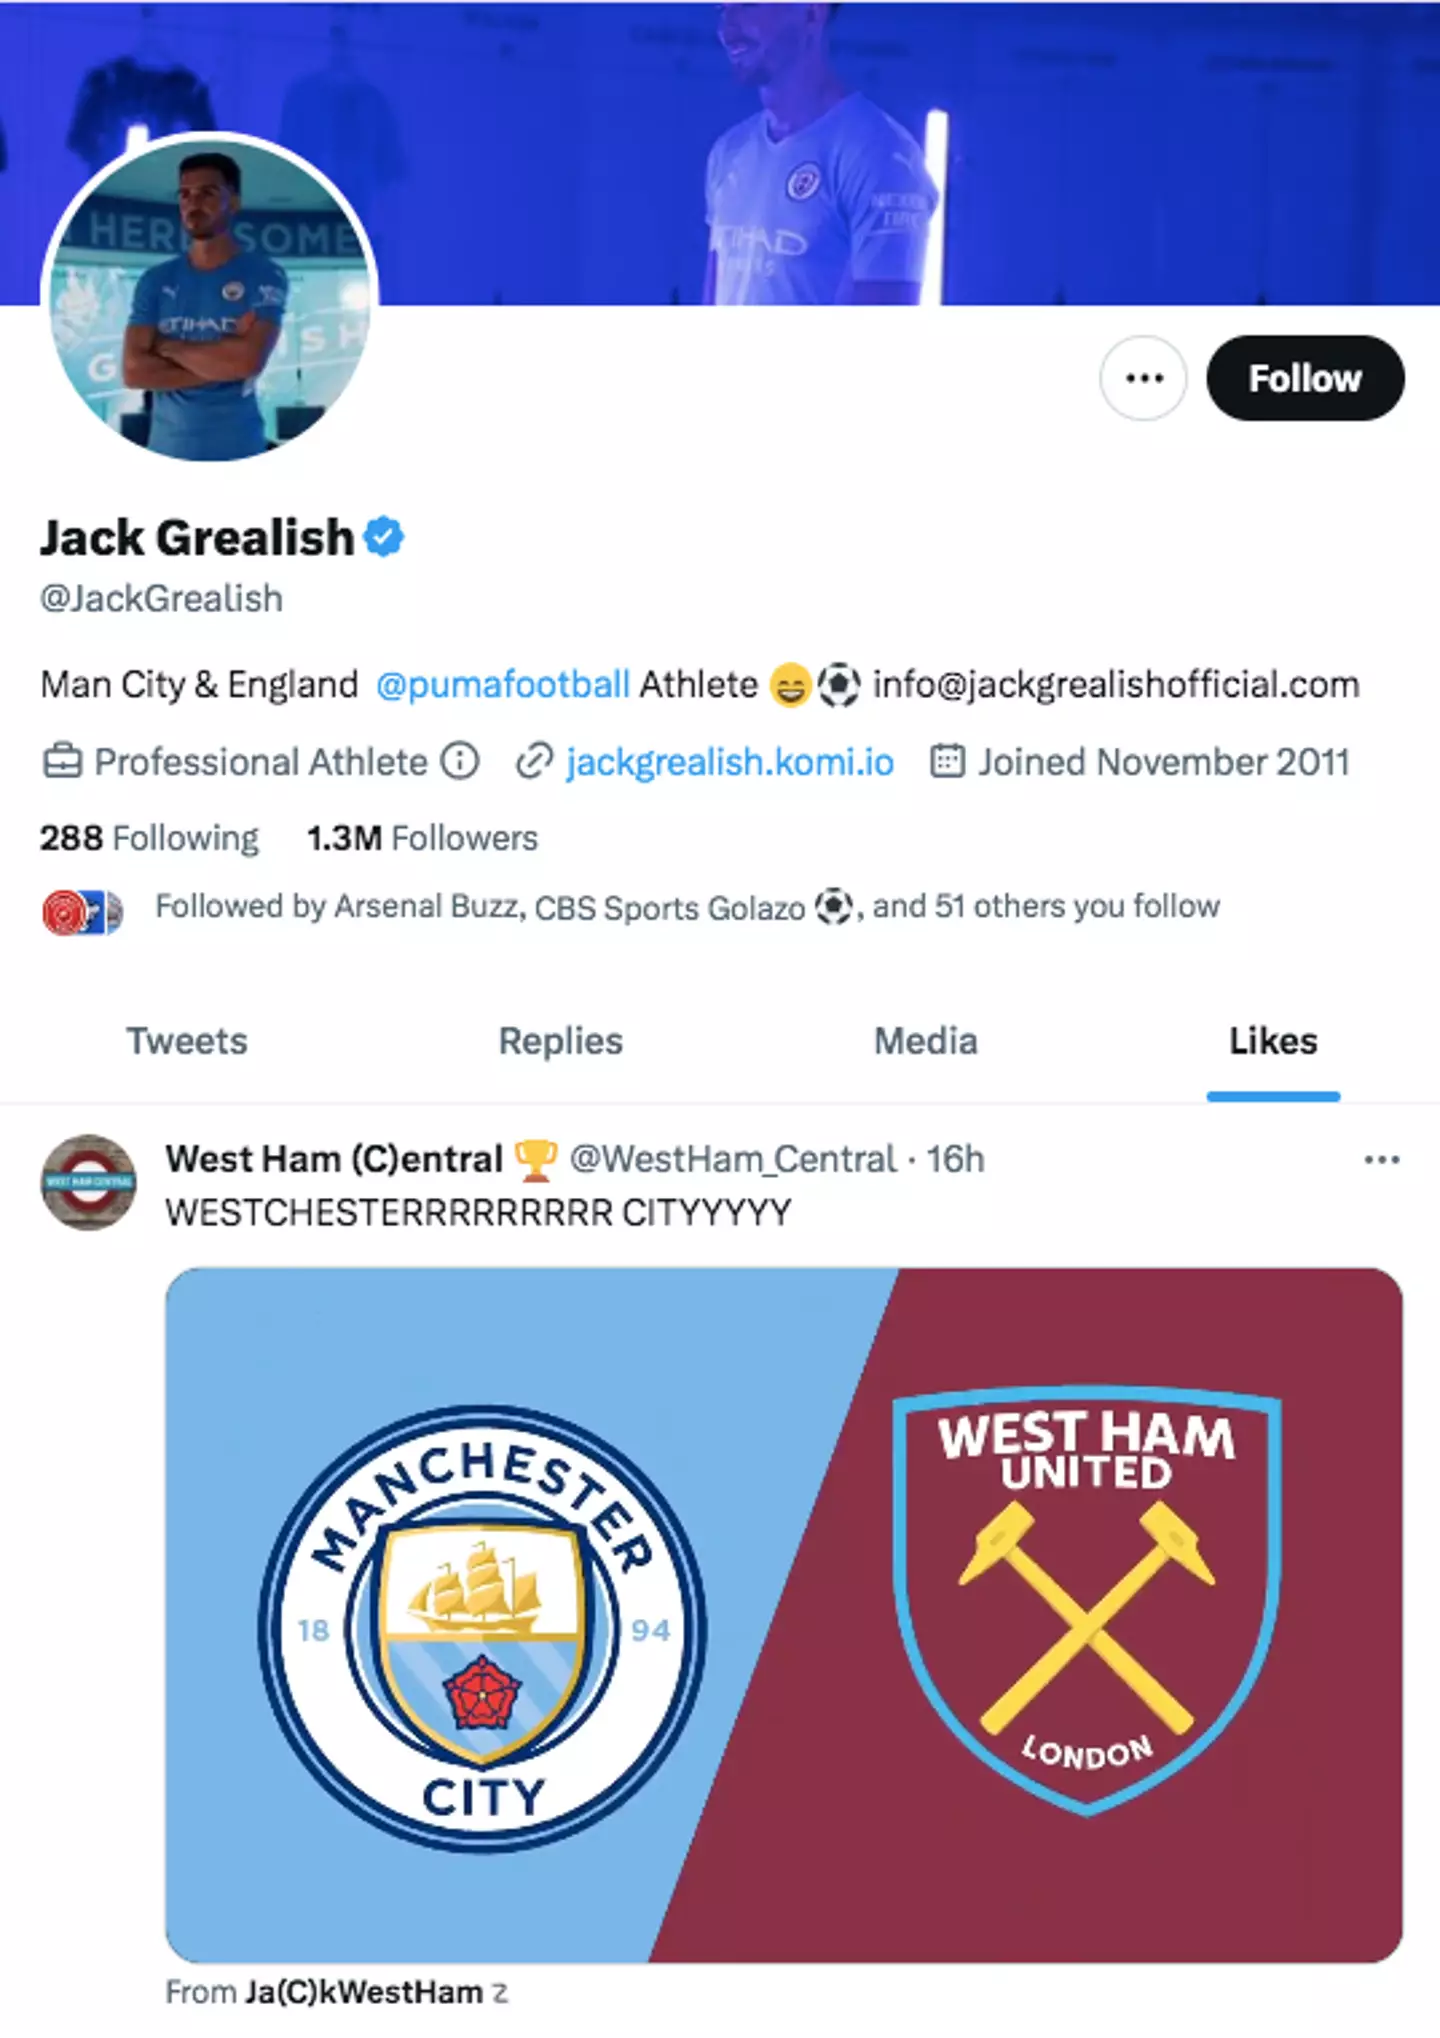 Jack Grealish liked a tweet hinting at Declan Rice's move to Manchester City.